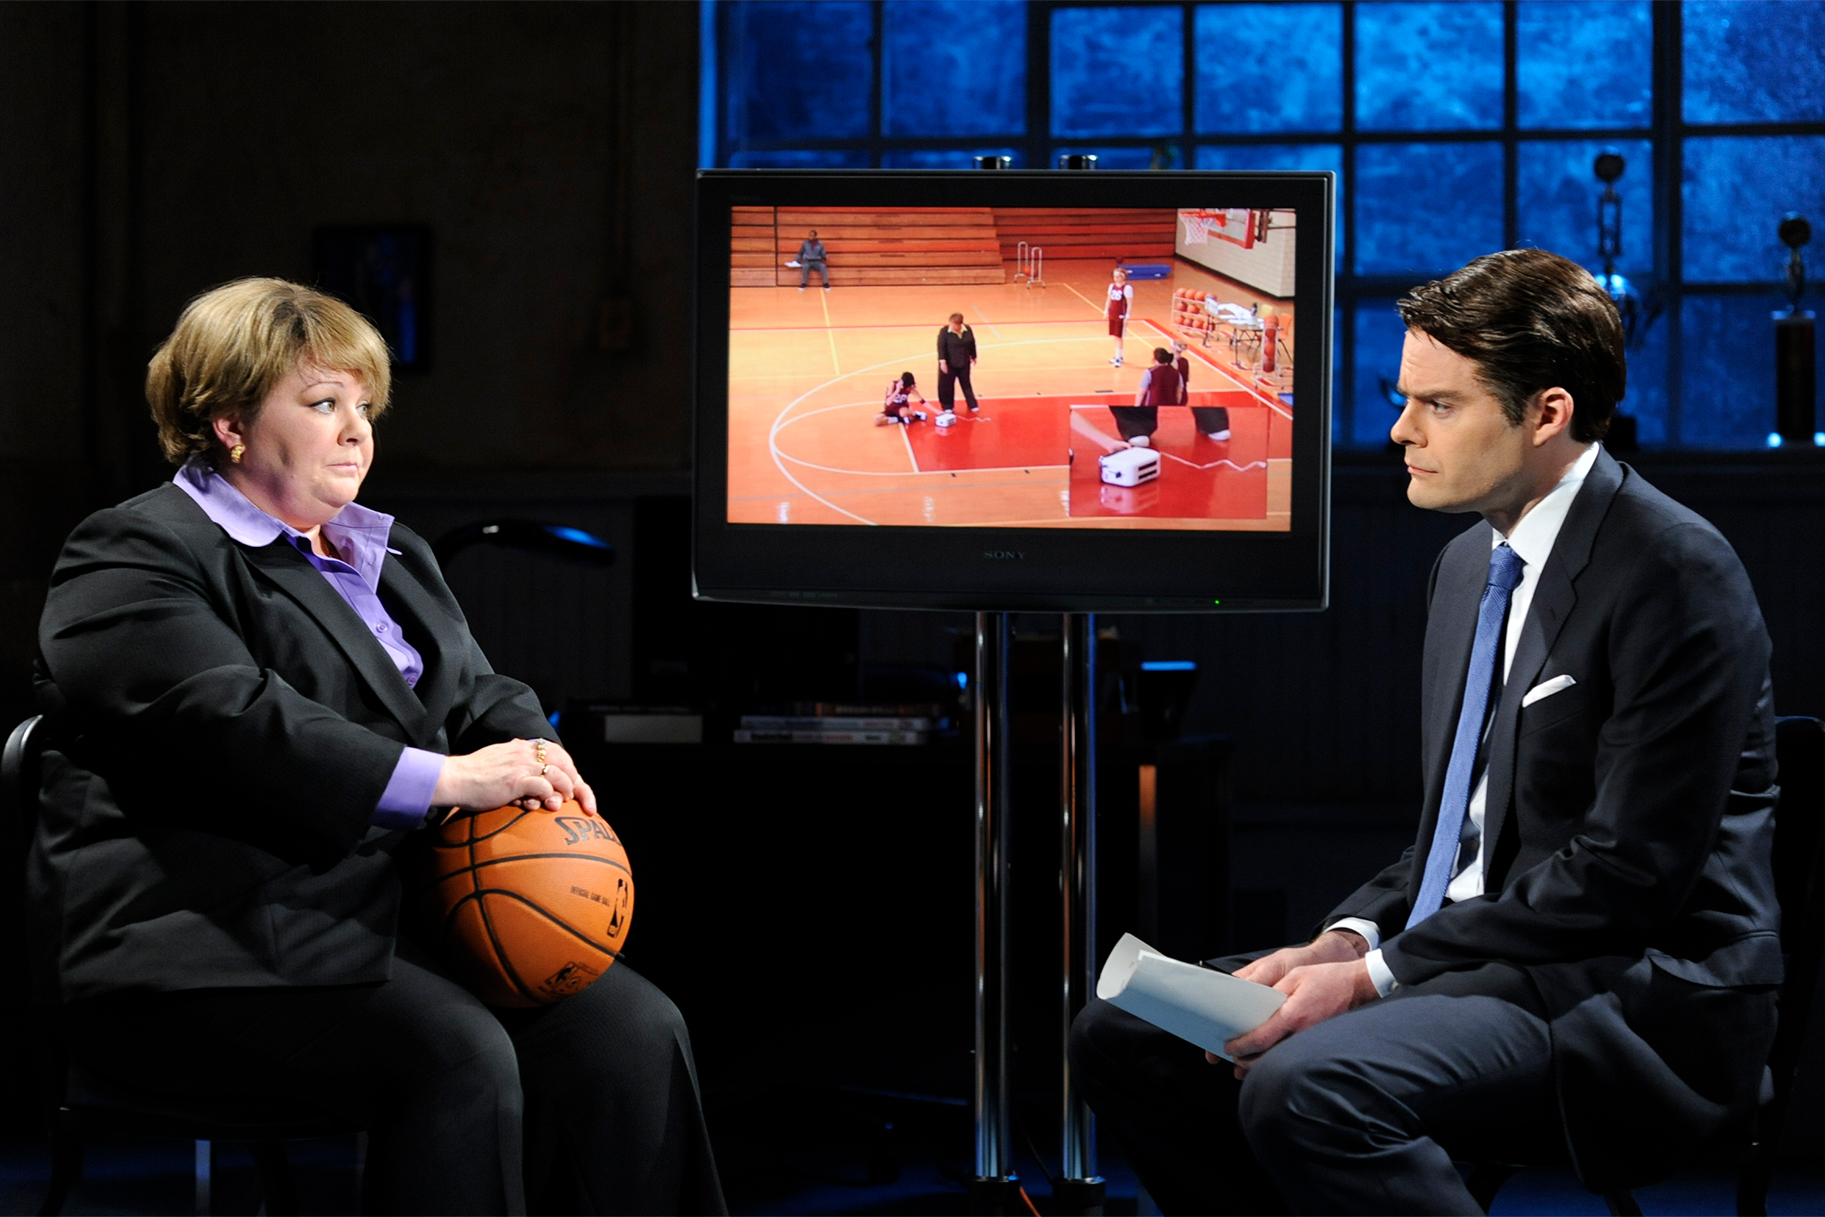 March Madness: SNL's "Outside the Lines" Sketch Is Melissa McCarthy at Her Funniest